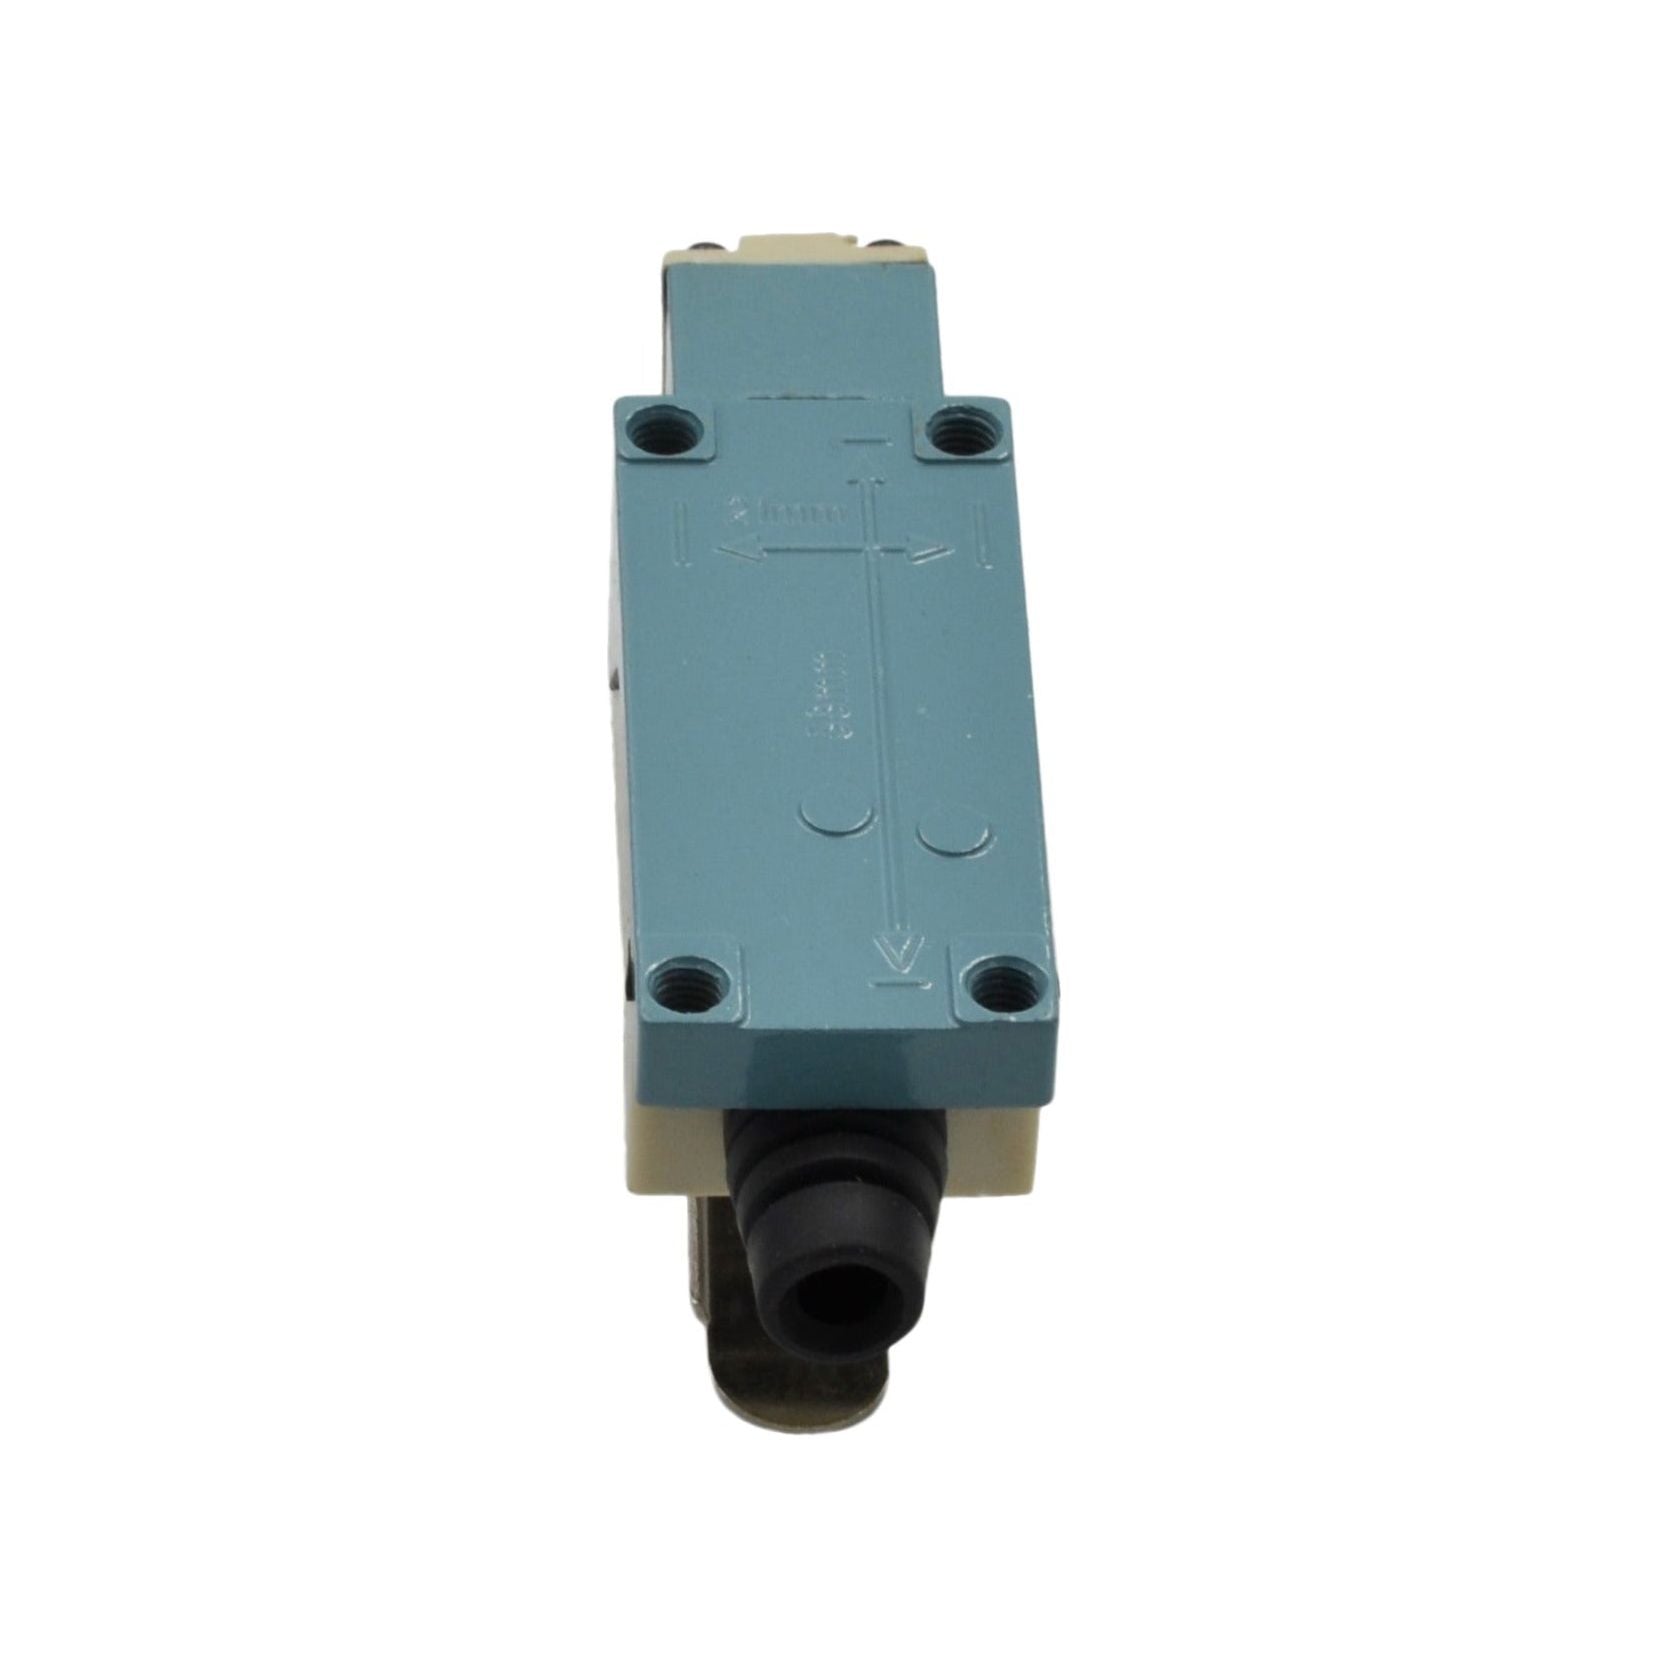 ME-8108 Rotary Adjustable Roller Lever Arm Limit Switch